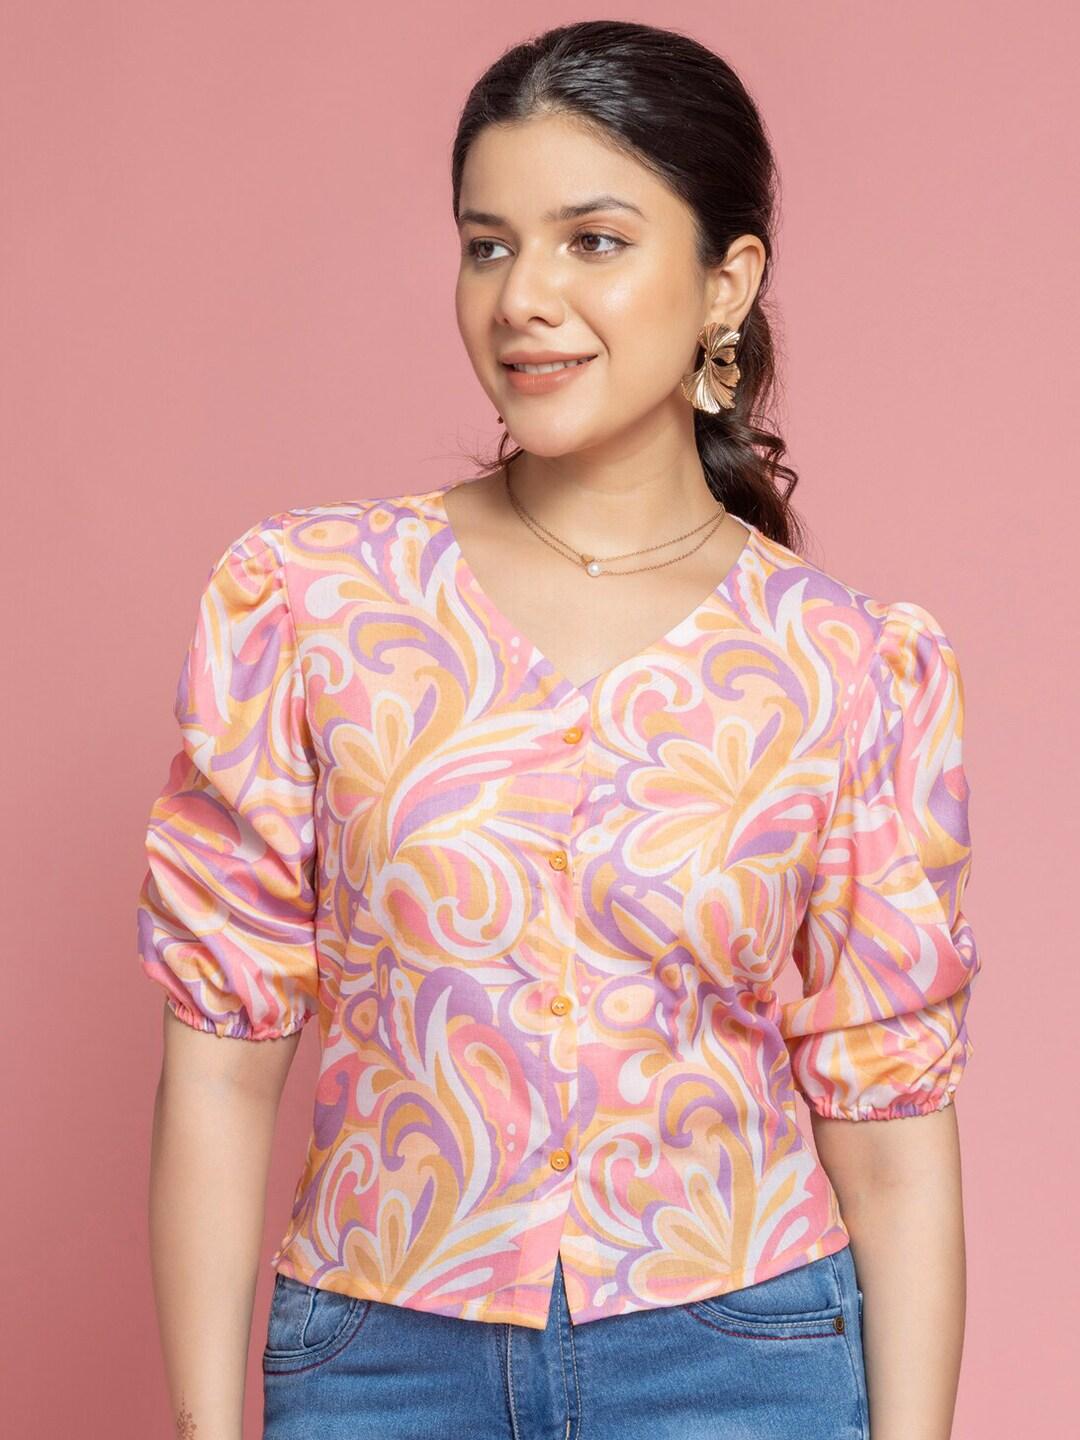 sew-you-soon-pink-print-puff-sleeve-cotton-shirt-style-top